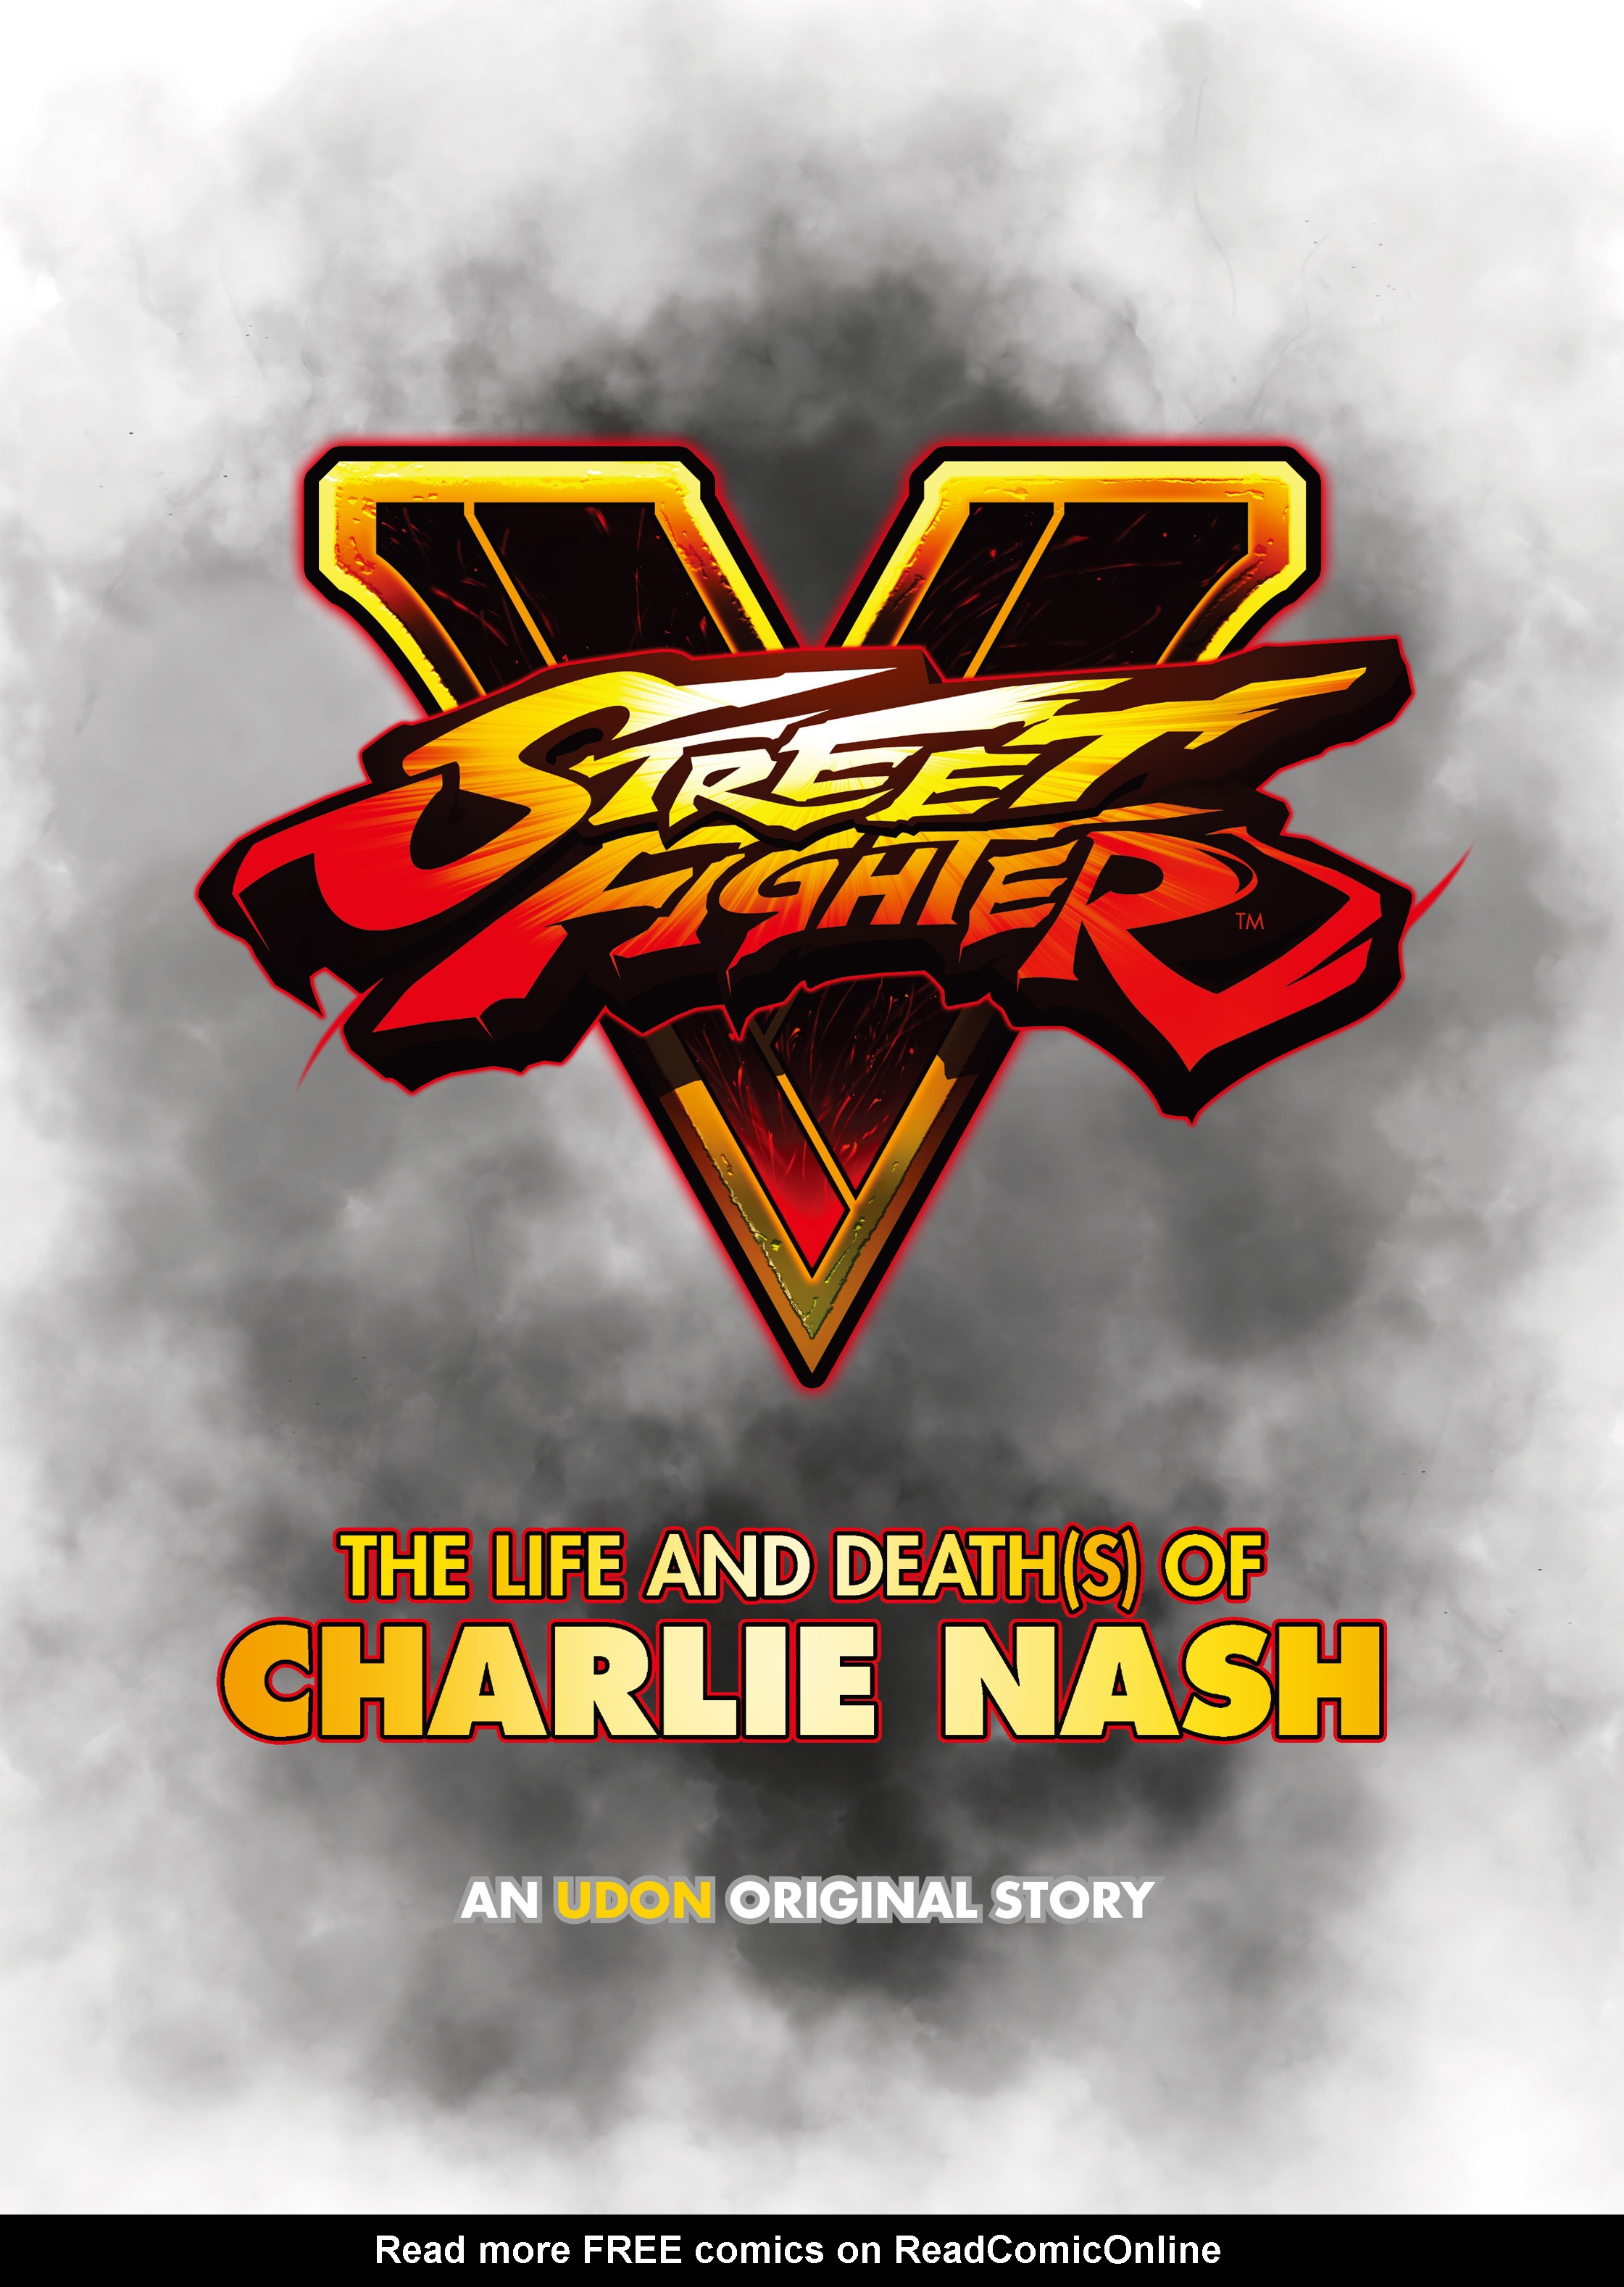 Read online Street Fighter V: The Life and Death(s) of Charlie Nash comic -  Issue # TPB - 2